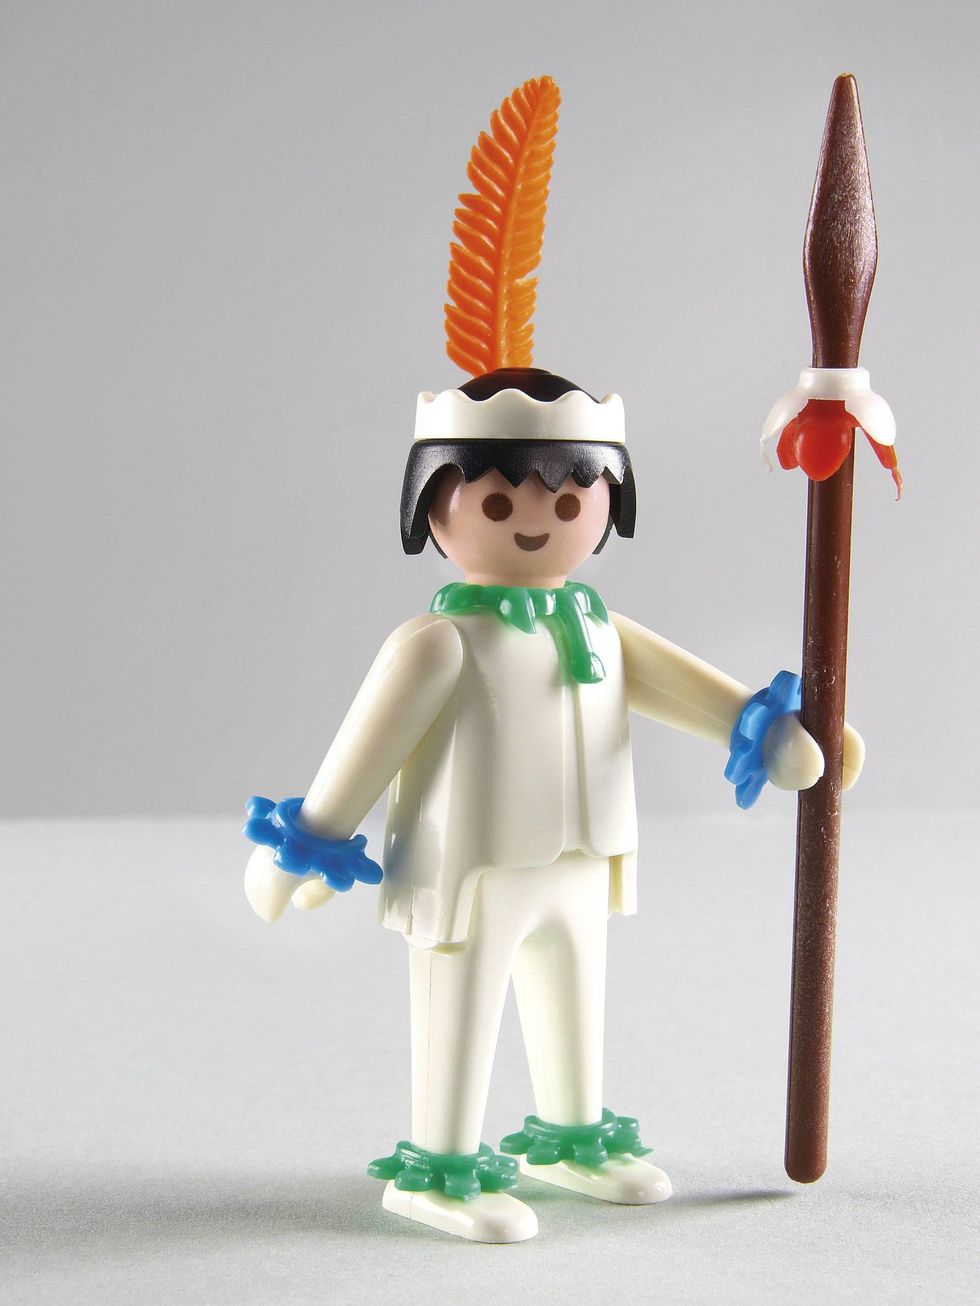 Standing, Toy, Costume accessory, Lego, Action figure, Pitchfork, Quiver, Fictional character, Costume hat, 